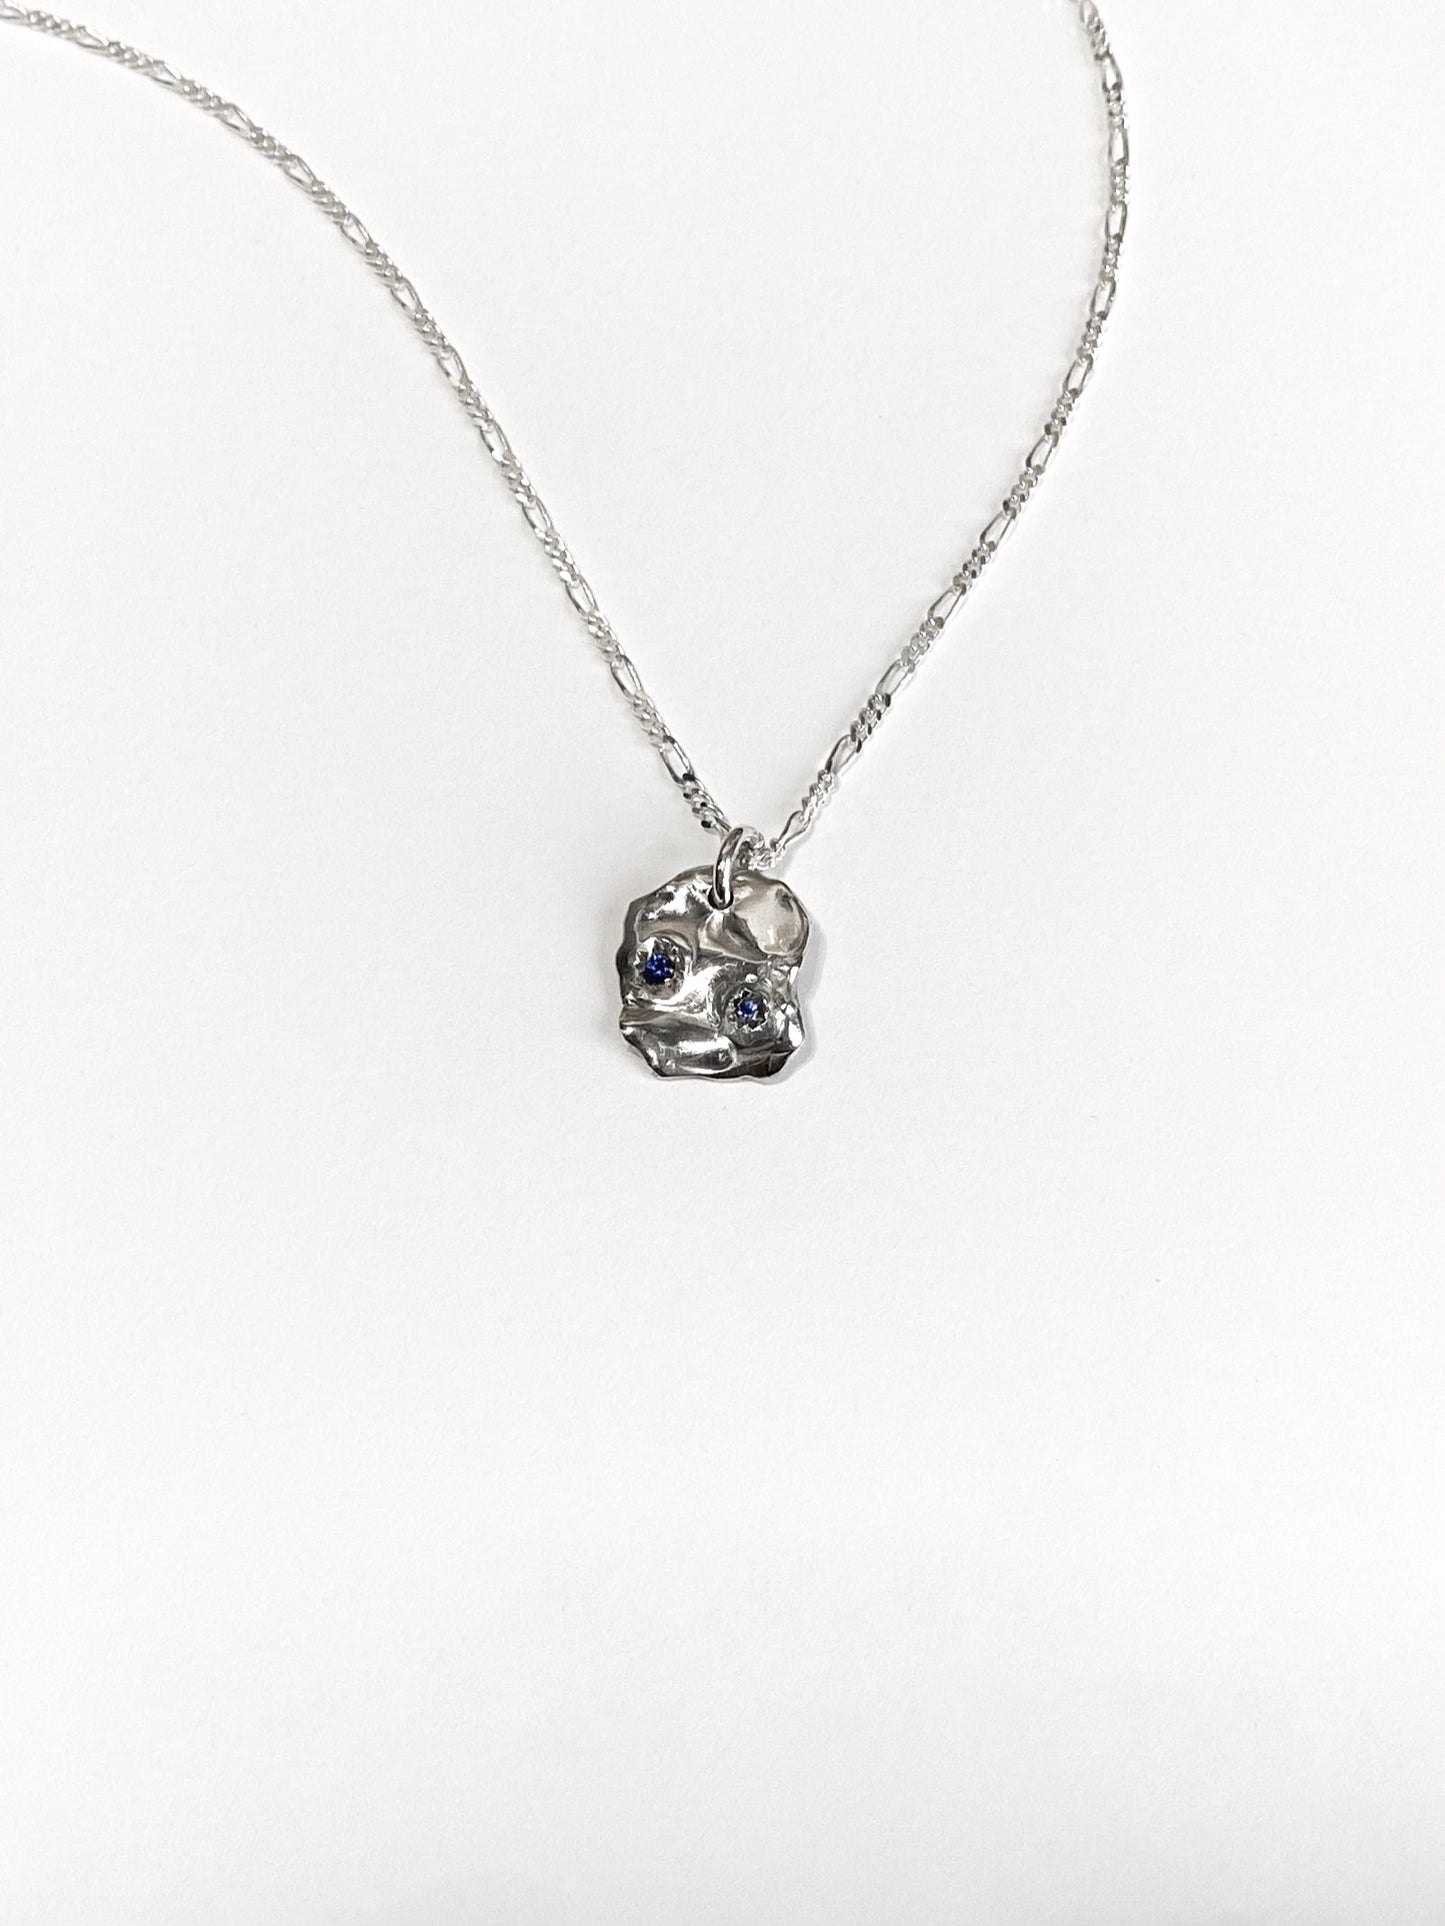 Silver molten pendant with 2 blue sapphires on chain on white background